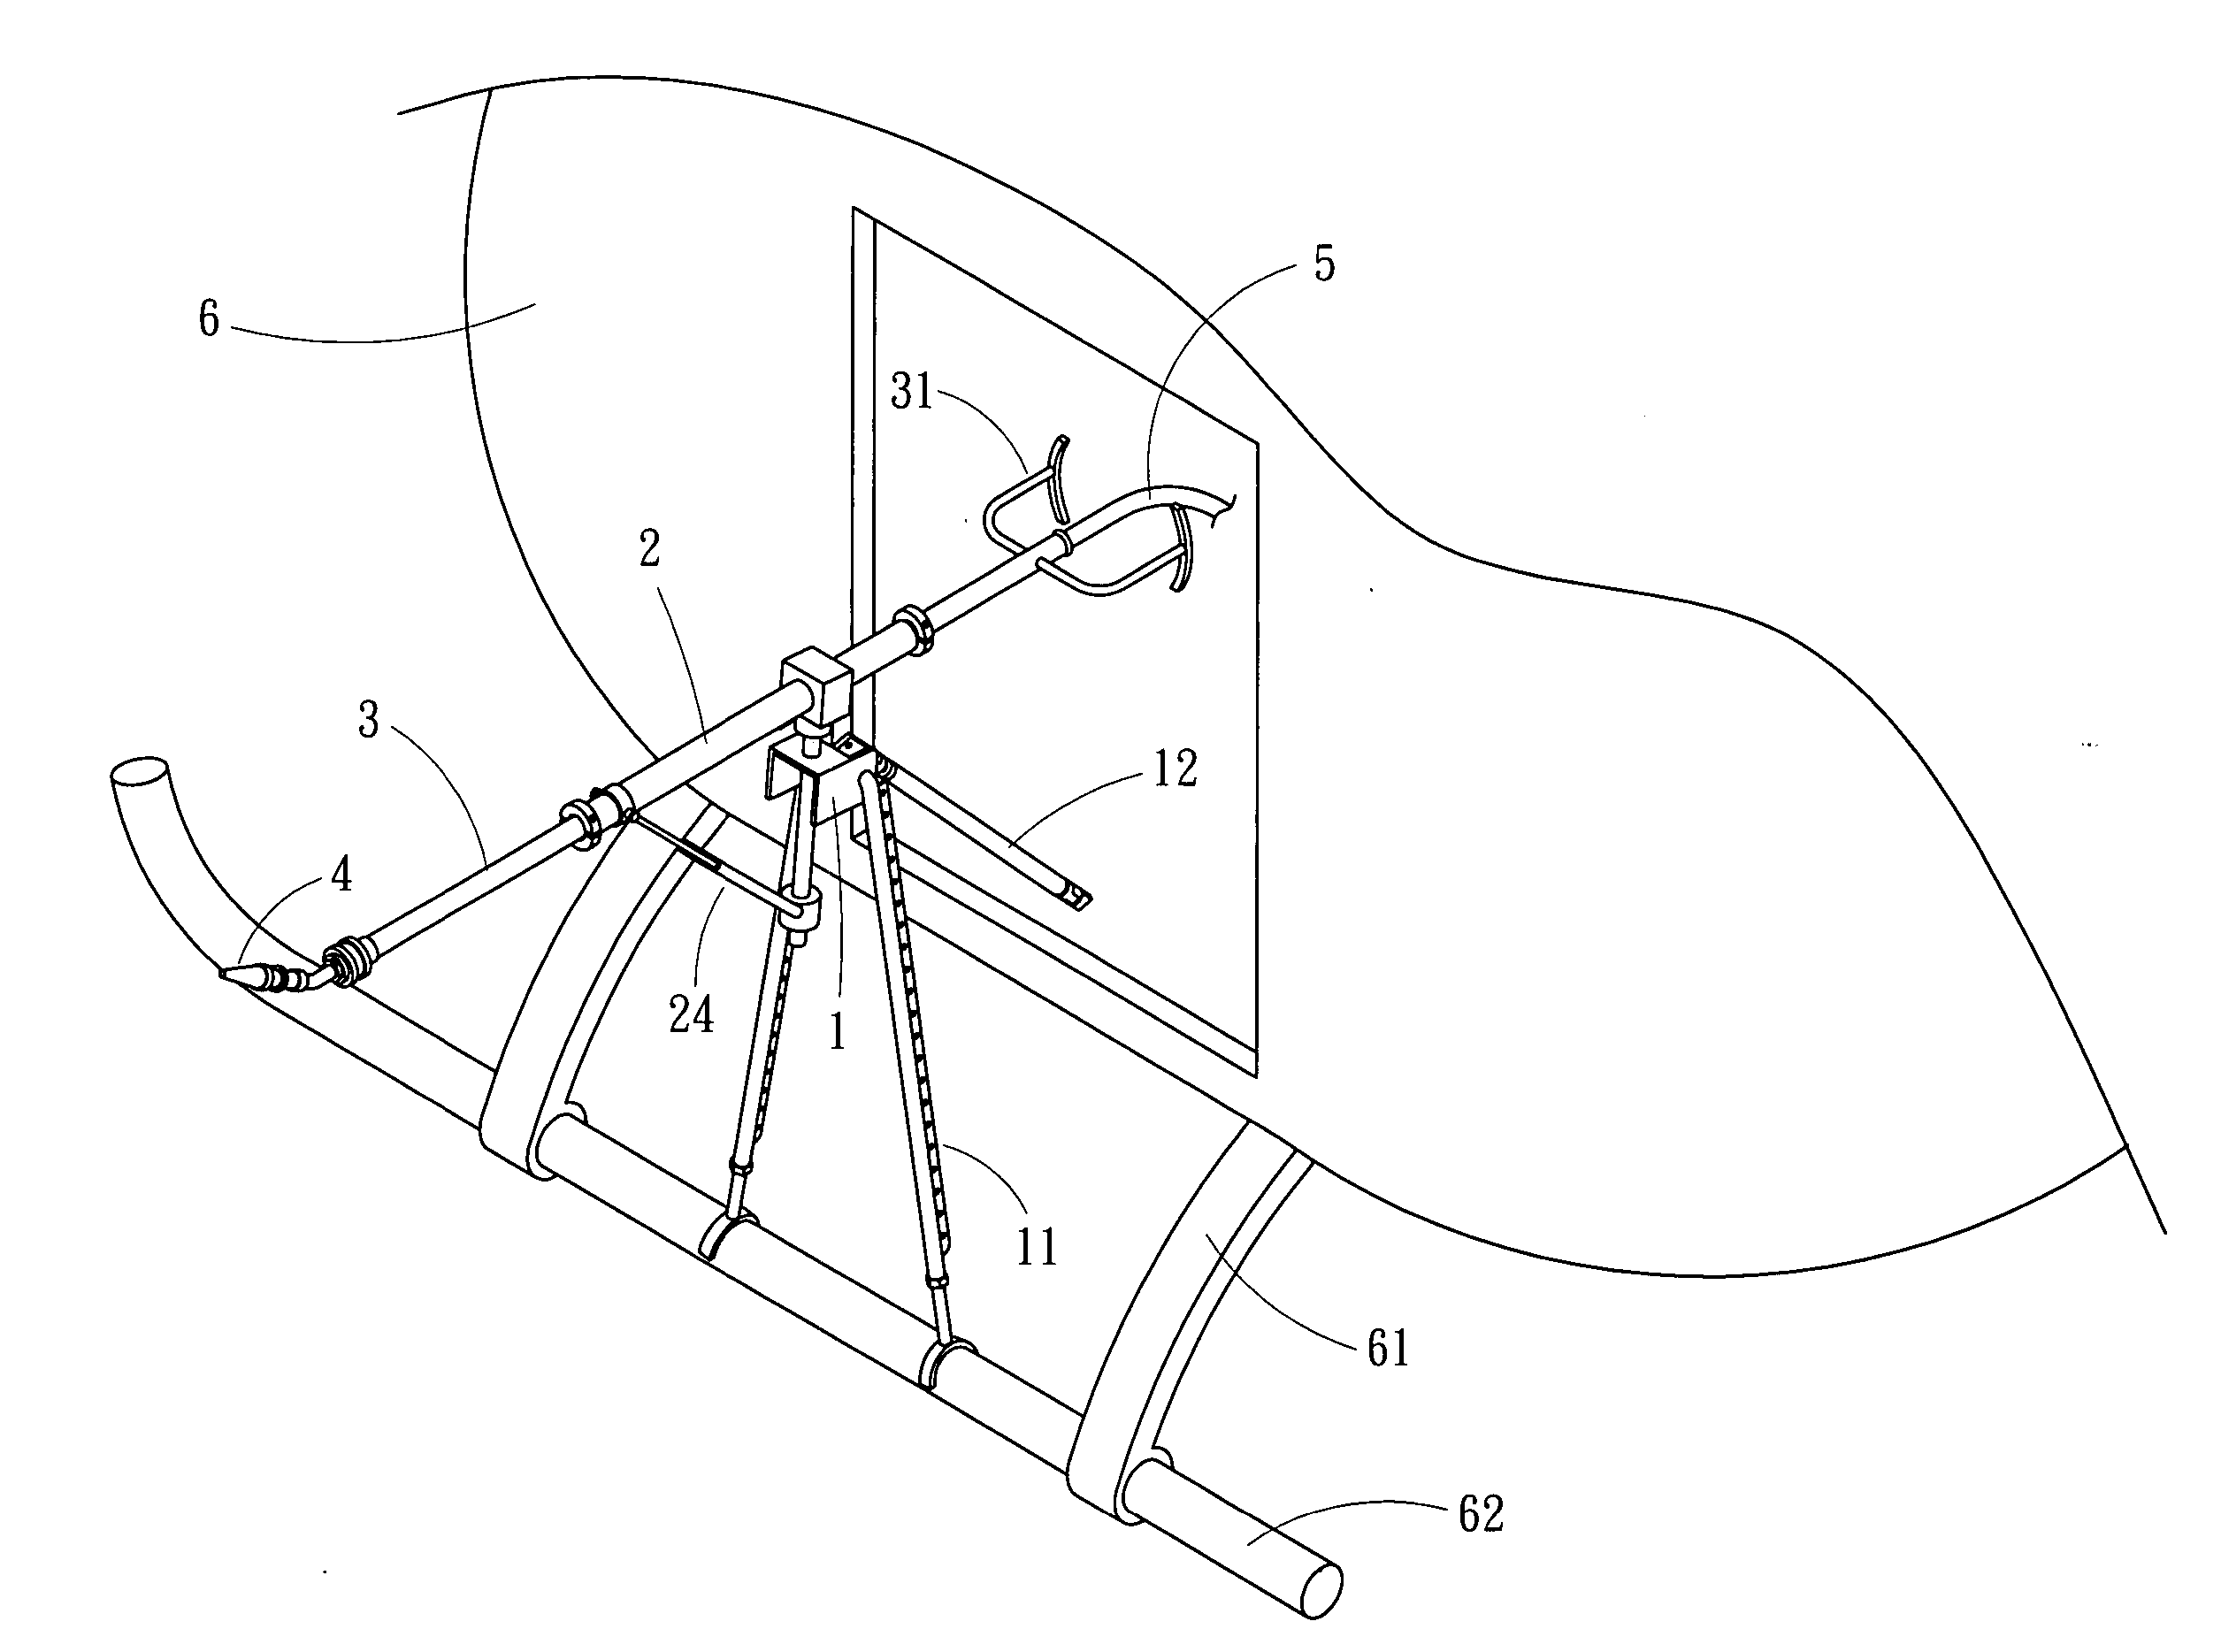 Spray washer structure of insulator used for aircraft